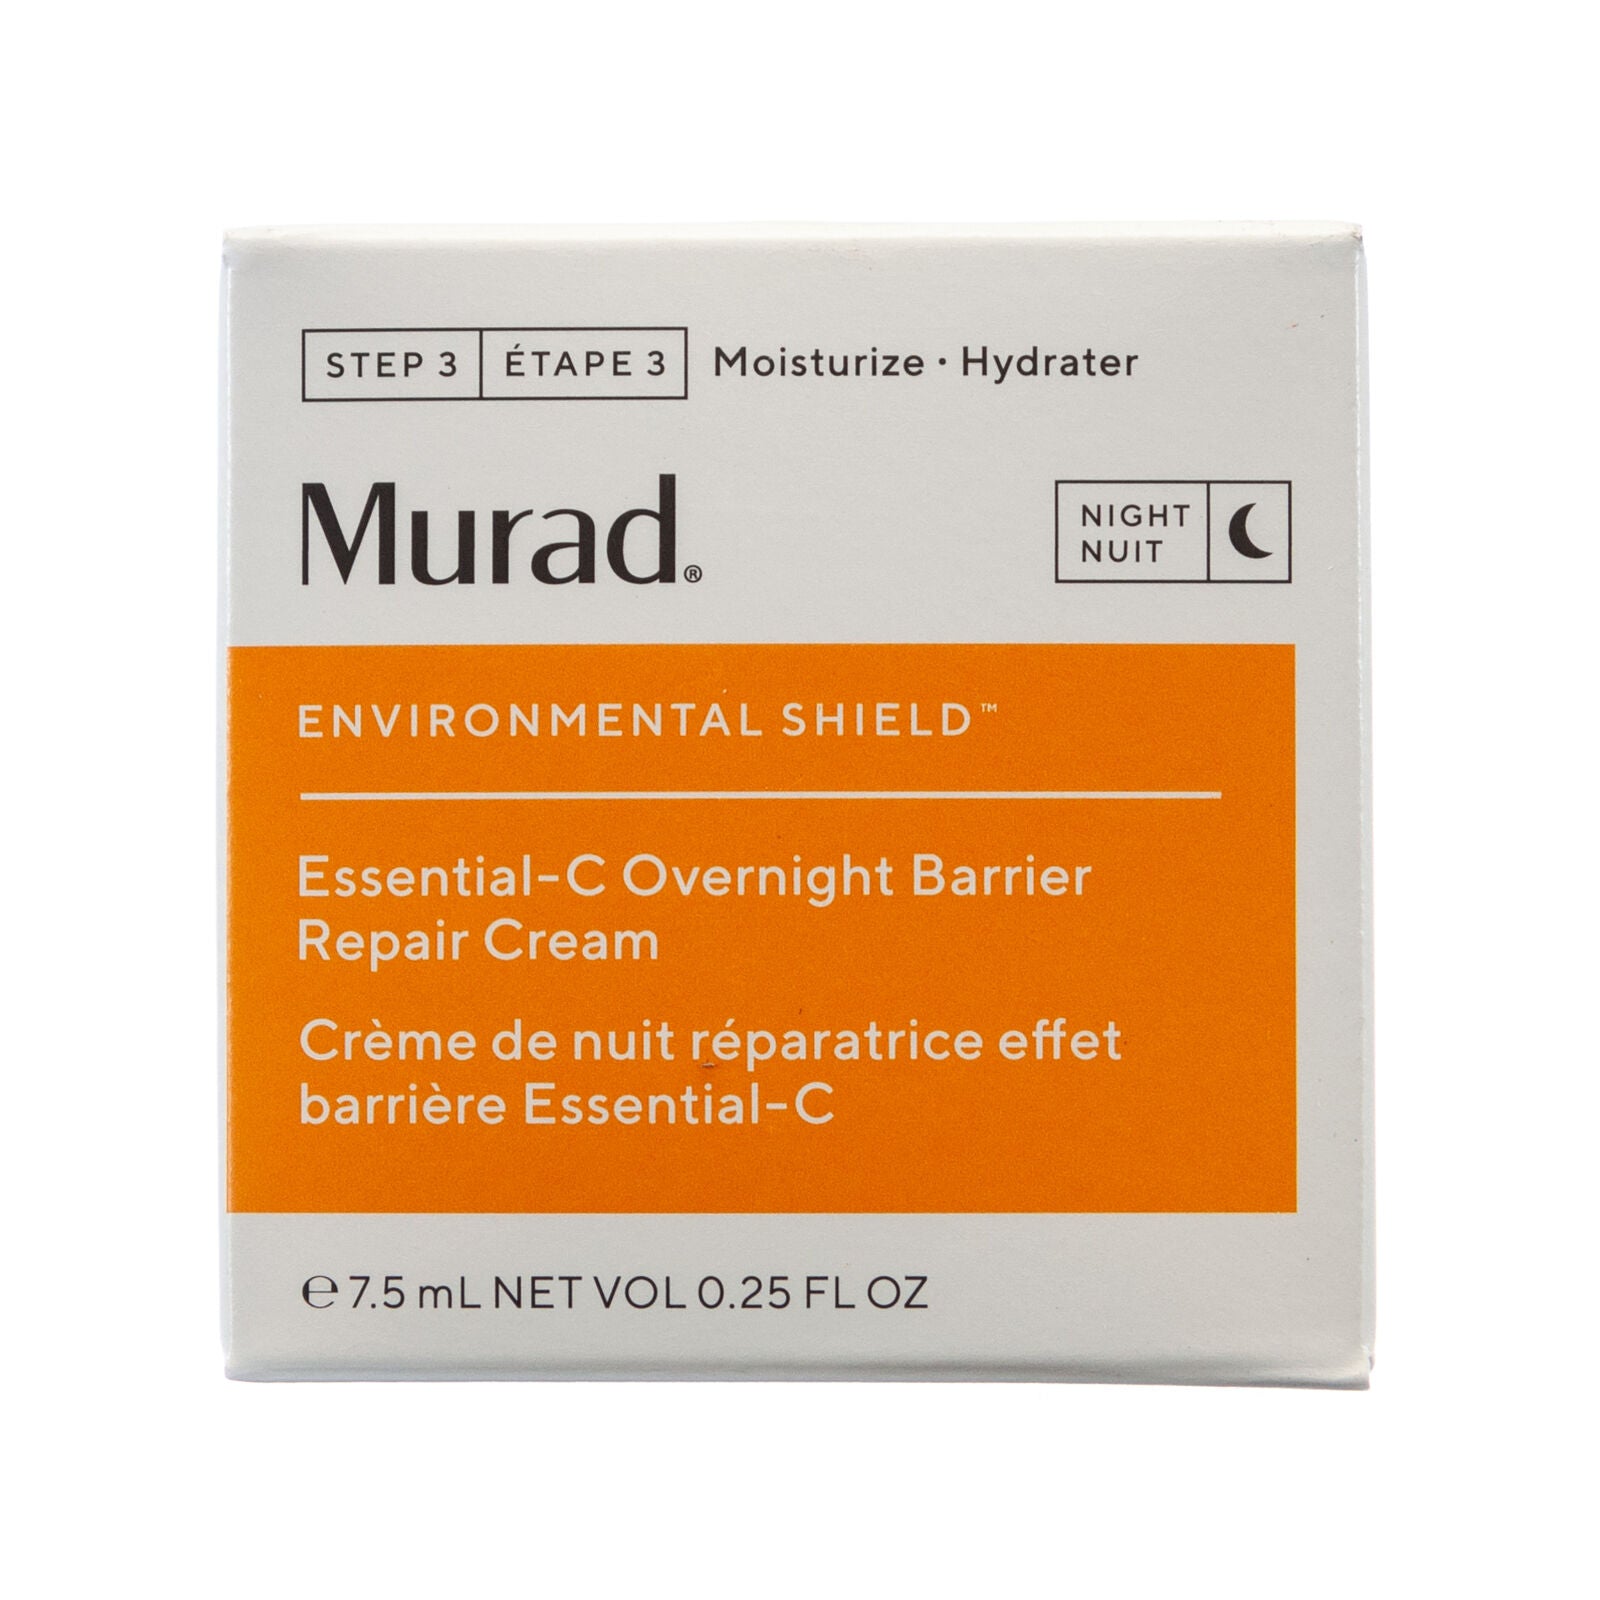 [Free Gift With $75 Purchase] Murad Environmental Shield Essential-C Overnight Barrier Repair Cream 0.25 oz